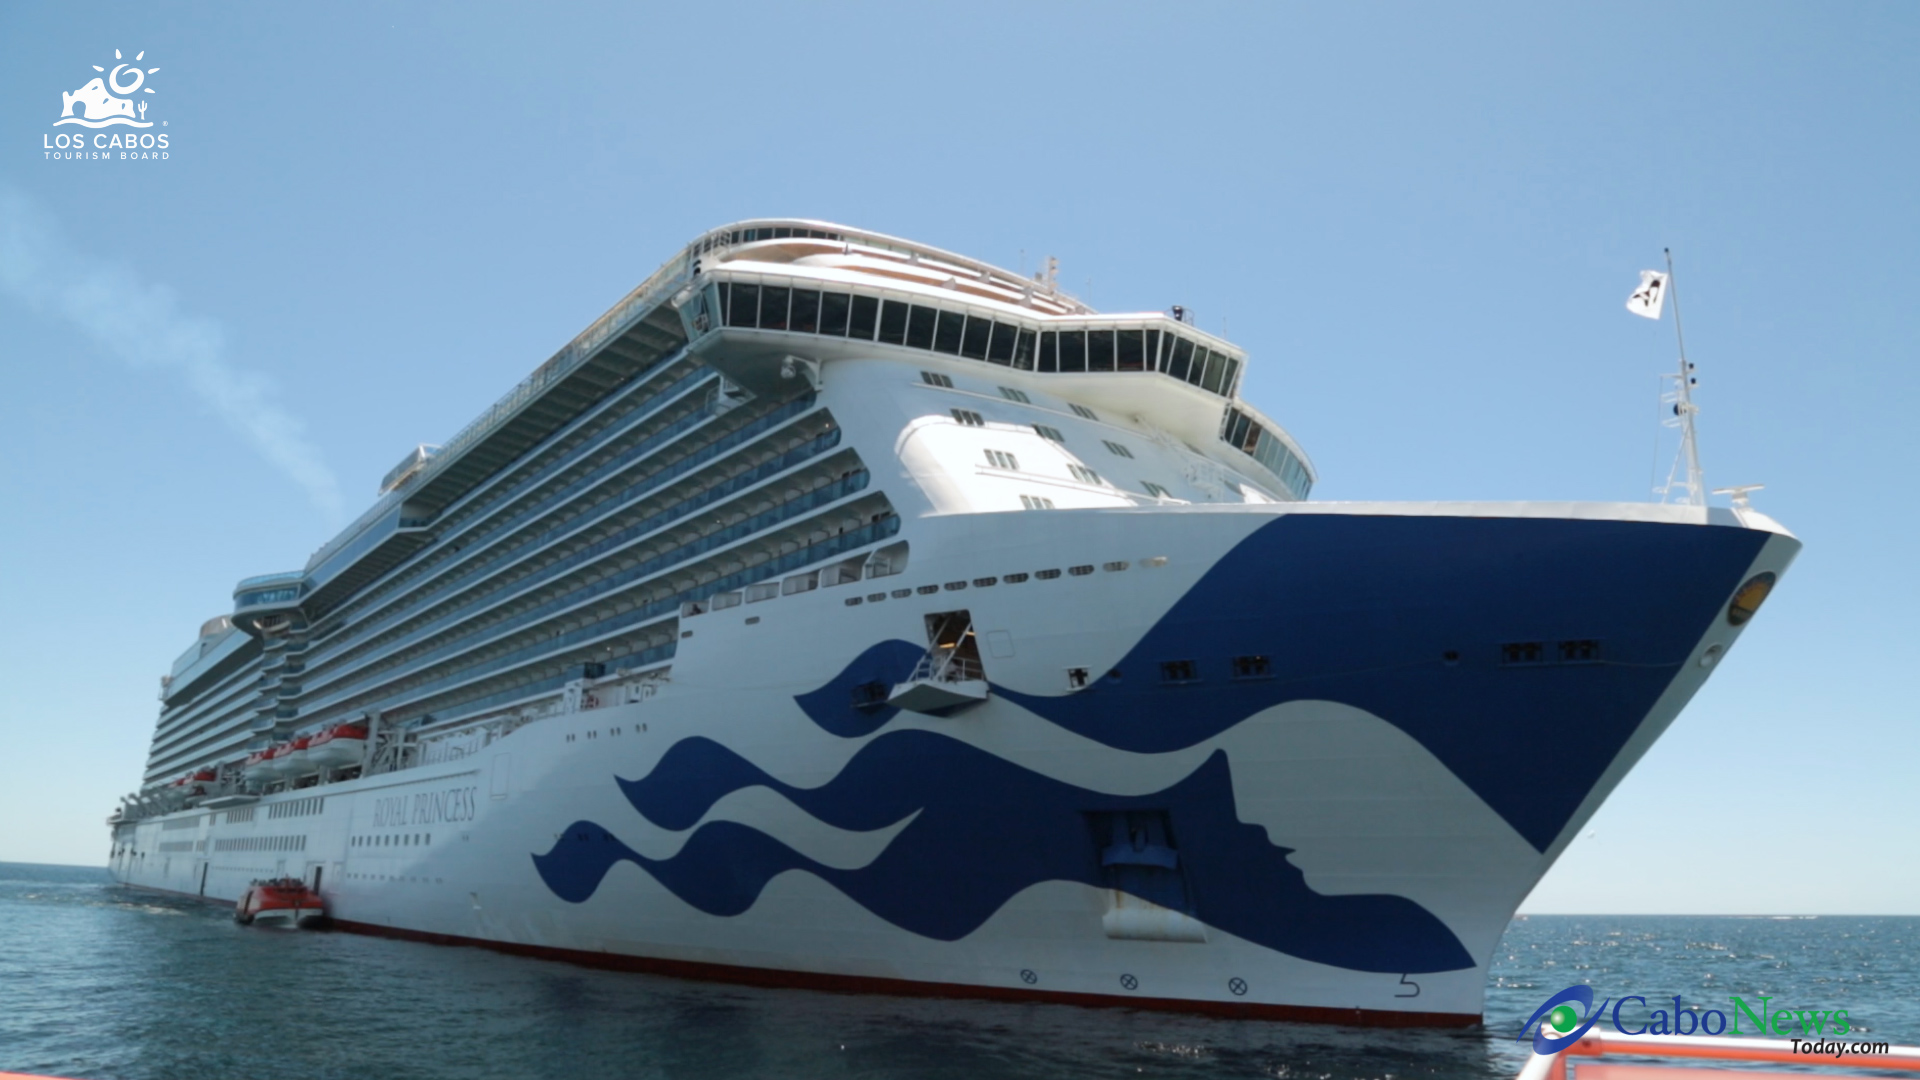 Princess Cruise Lines largest cruise ship Cabo News Today Los Cabos